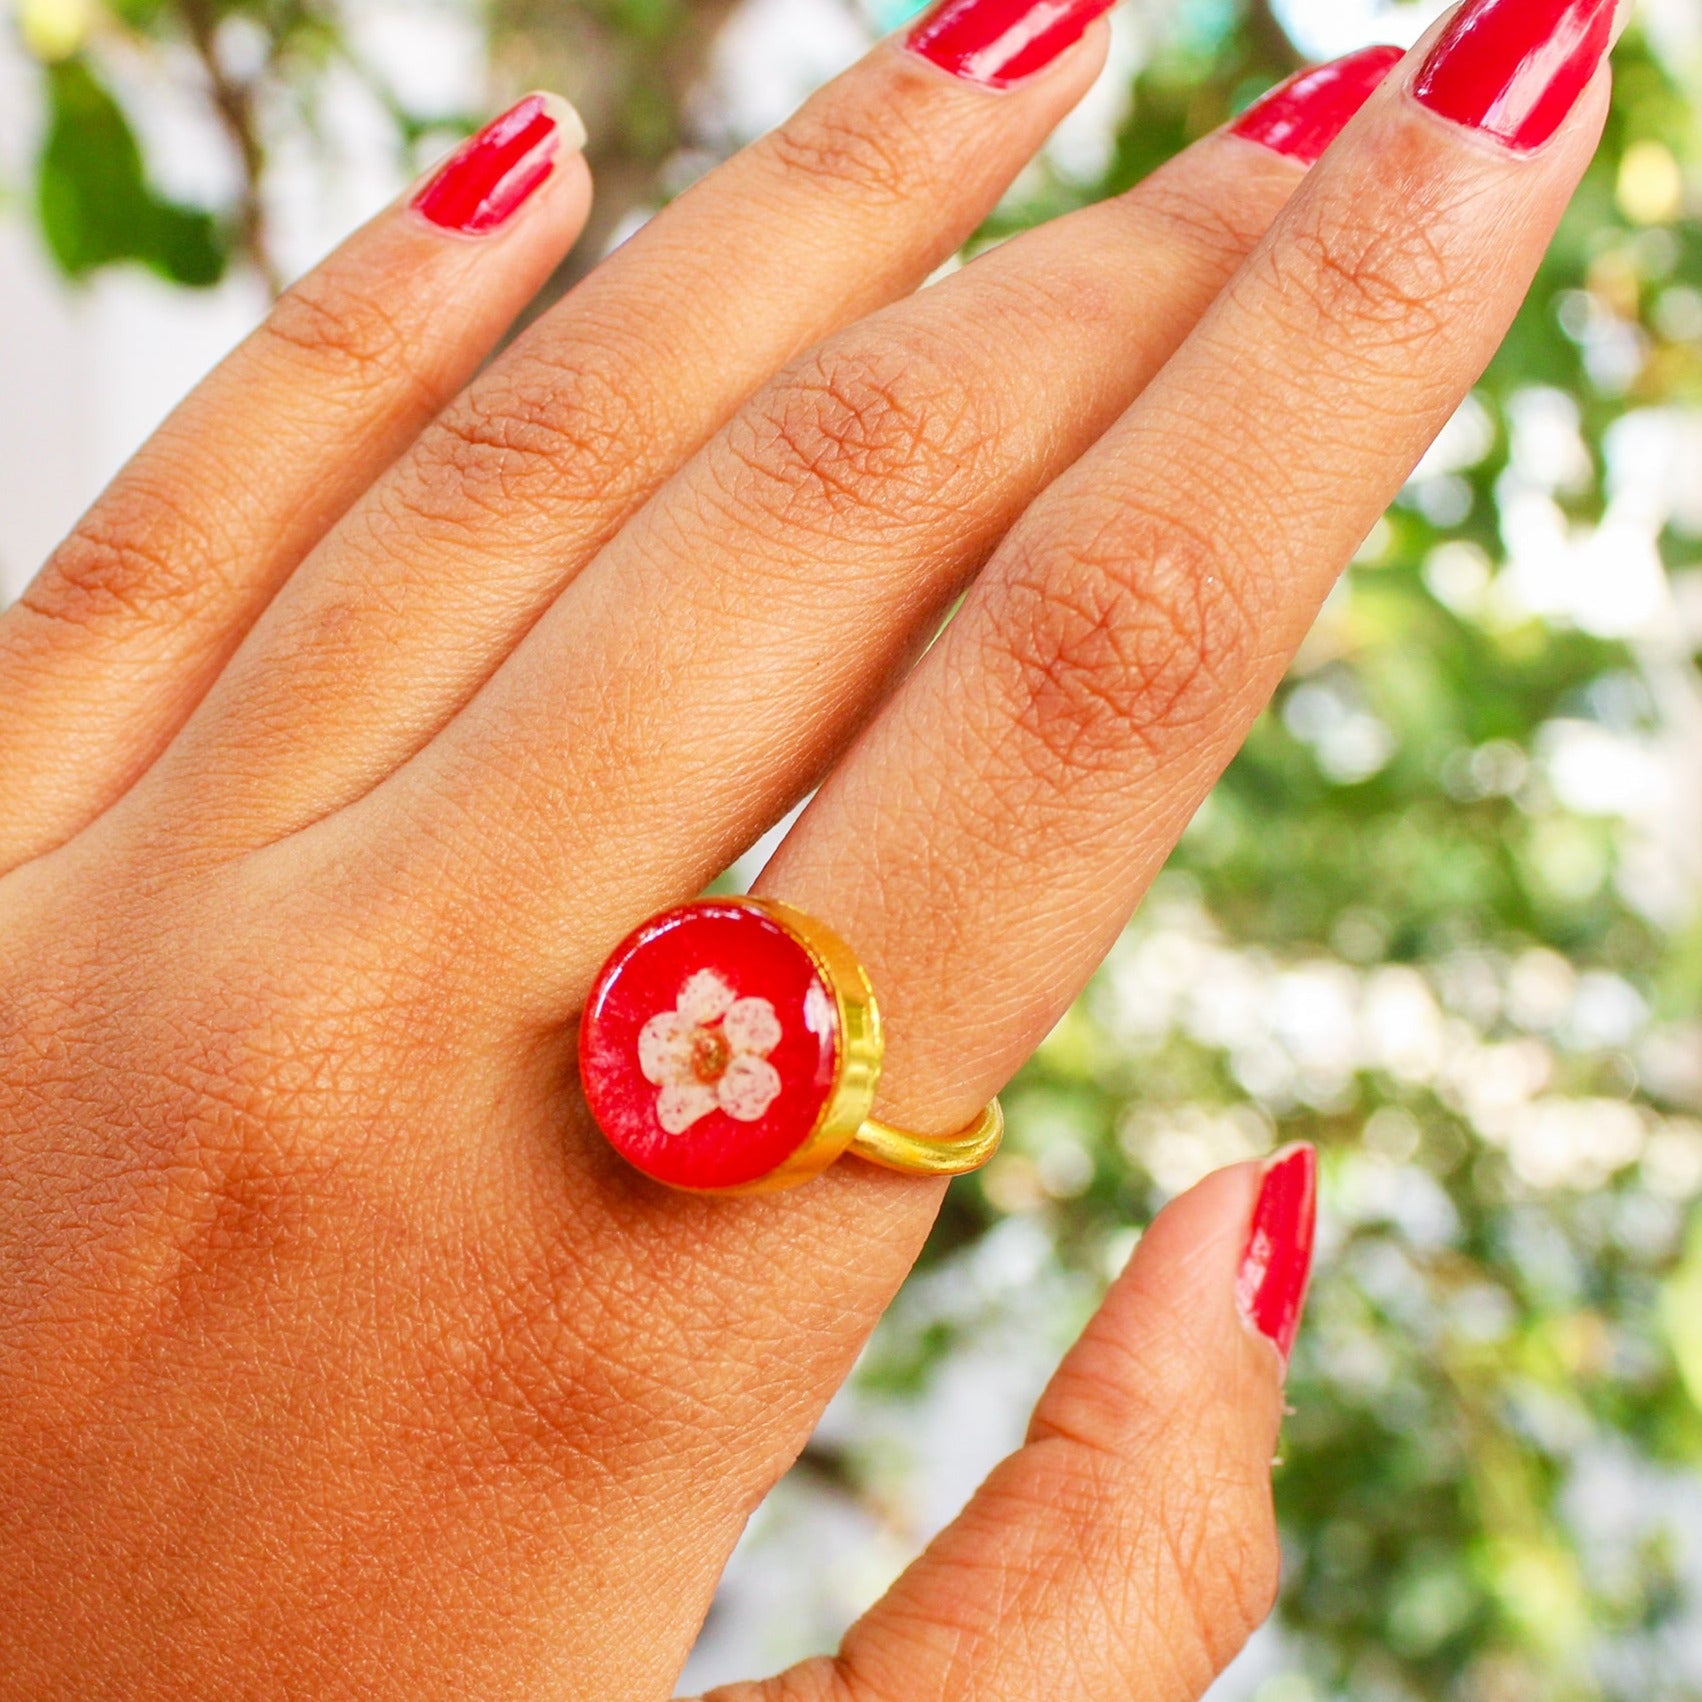 Vermilion Serenade Blossom Ring with Real Plum Flowers